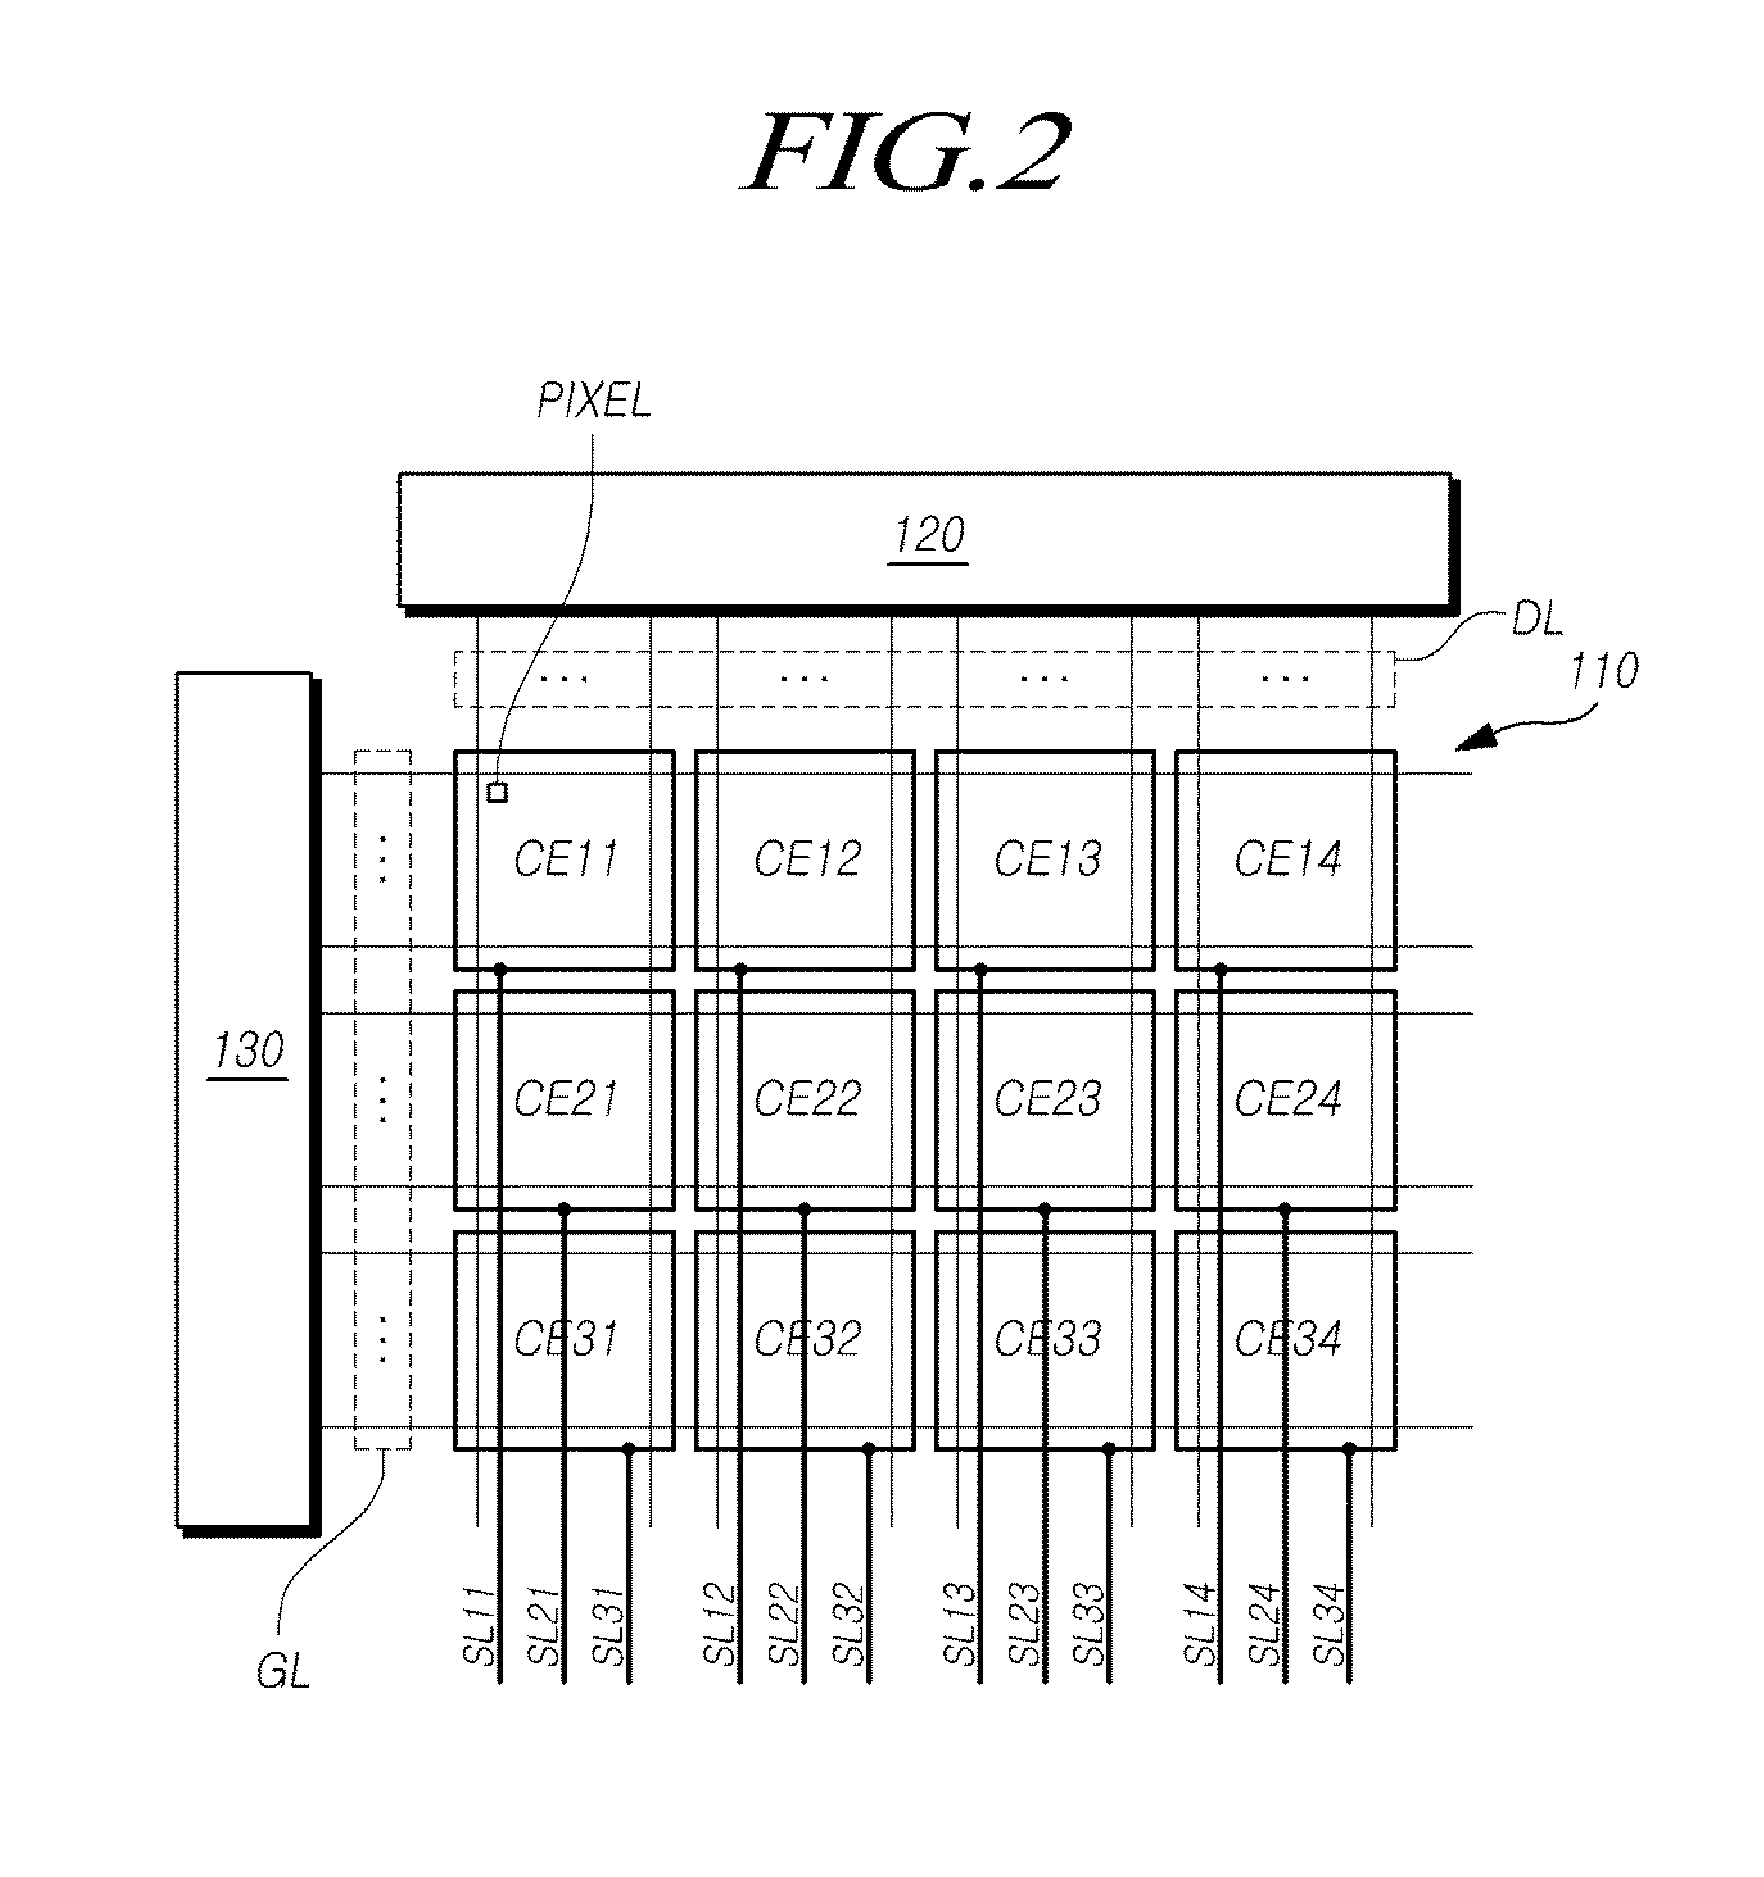 In-cell touch display device